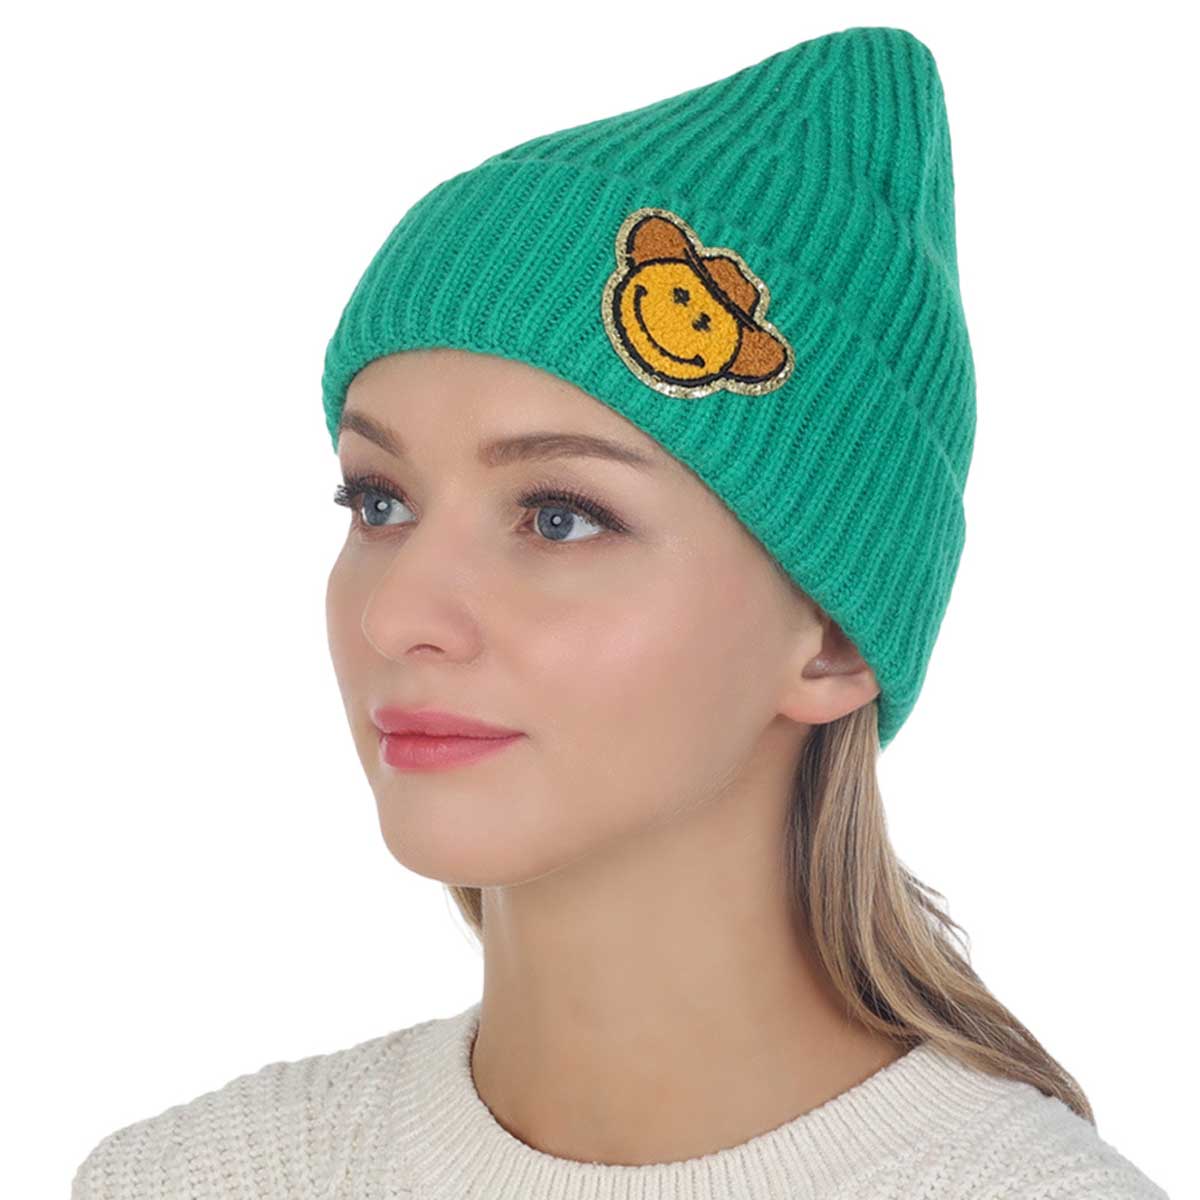 Green Cowboy Hat Smile Accented Knit Beanie Hat. From daily life to holidays, this stylish beanie hat's cozy fabric will keep you looking great and feeling warm. This knit beanie is to be a great gift for women, ladies, and girls. A wide range of colors lets you choose your favorite one or you can pick several colors to go !